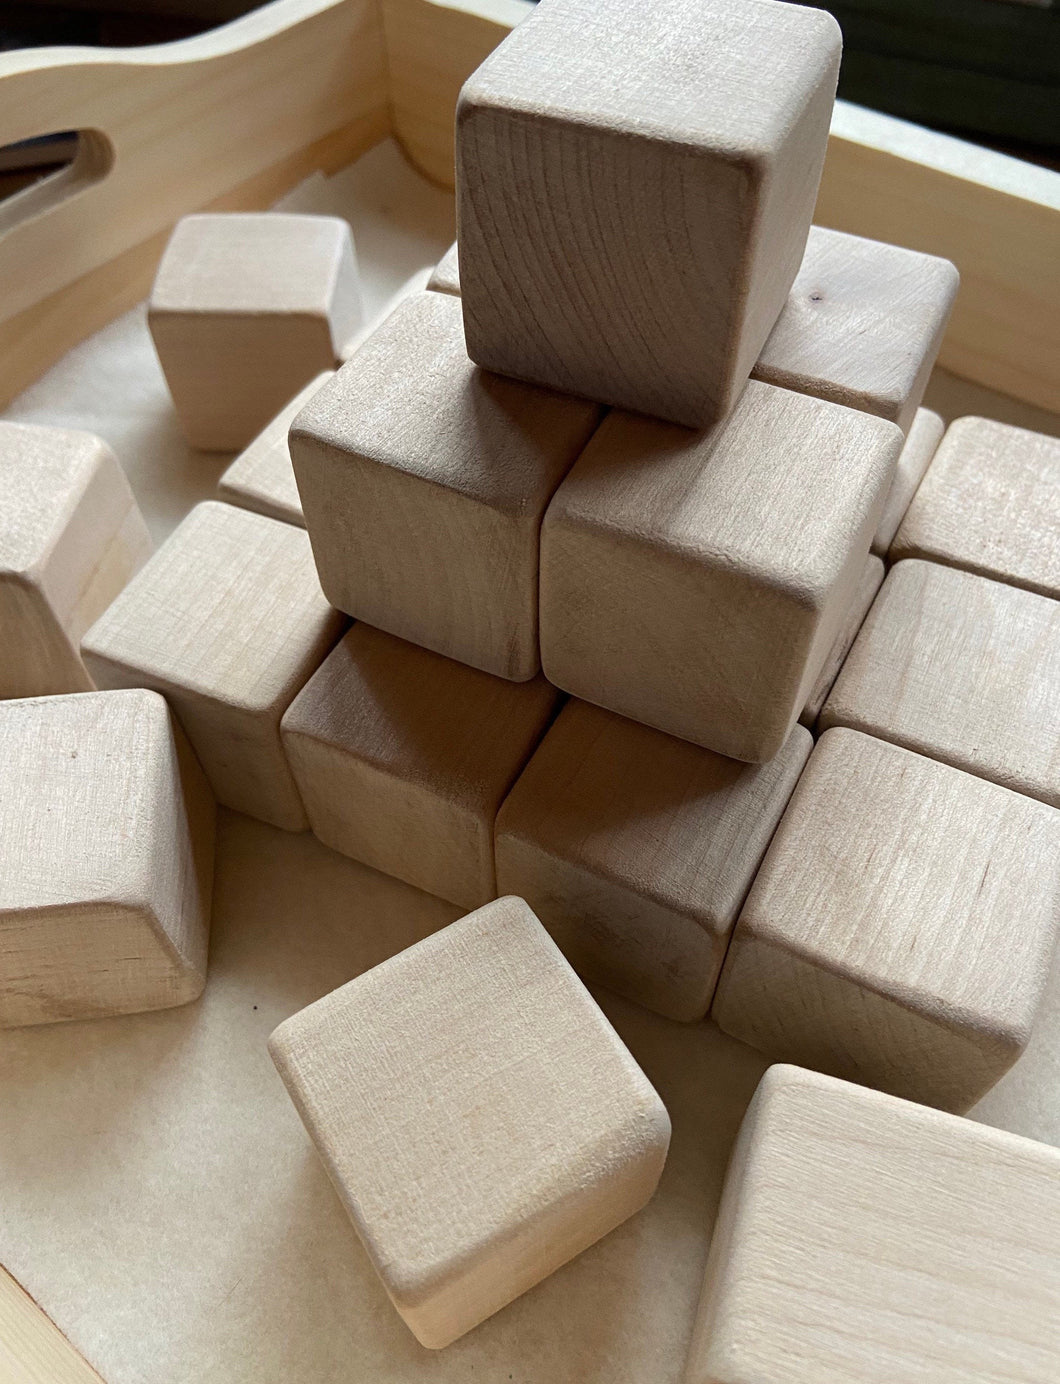 Smoothly Sanded Blank Maple Wooden Blocks  - DIY - Decorate - Baby Blocks - Sealed Option - Sets in Multiples of 6